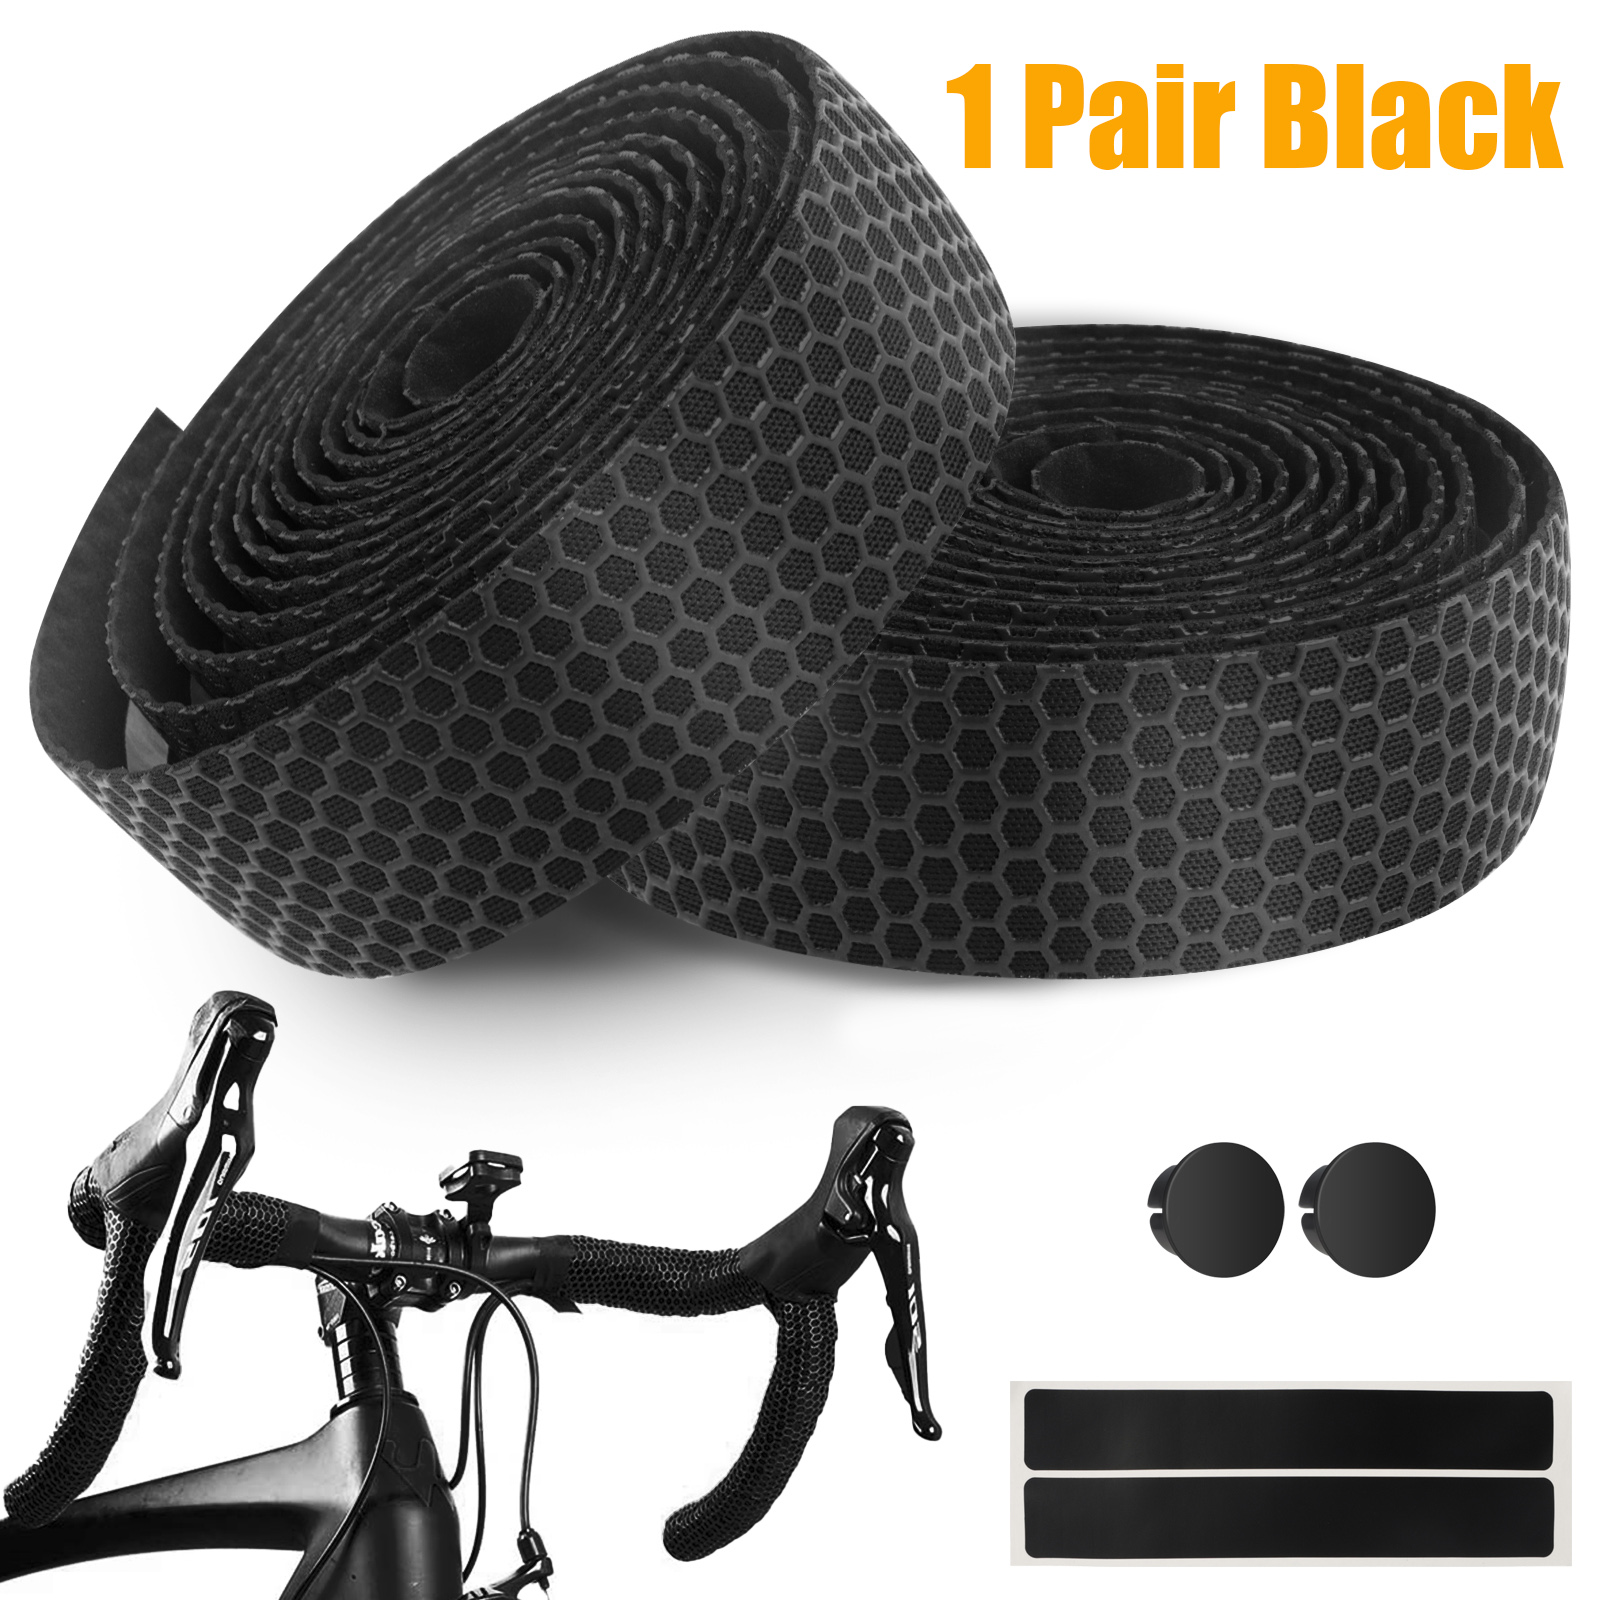 Details about   2 PCS Road Bike Handlebar Tape Bicycle Drop Bar Wrap Outdoor Sports Non-slip 